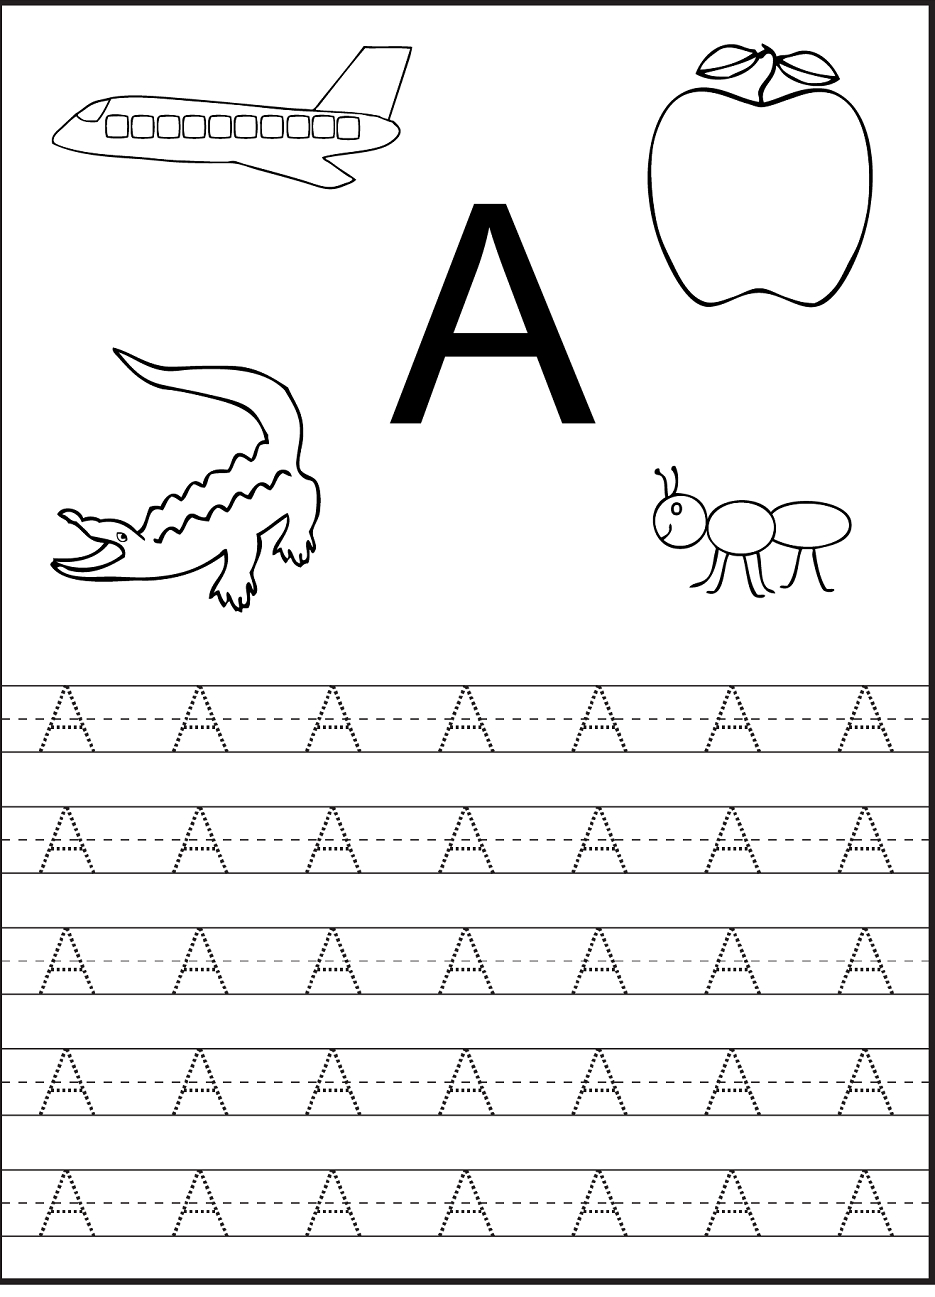 Tracing The Letter A Free Printable | Preschool Worksheets inside Tracing Letters Worksheets For Nursery